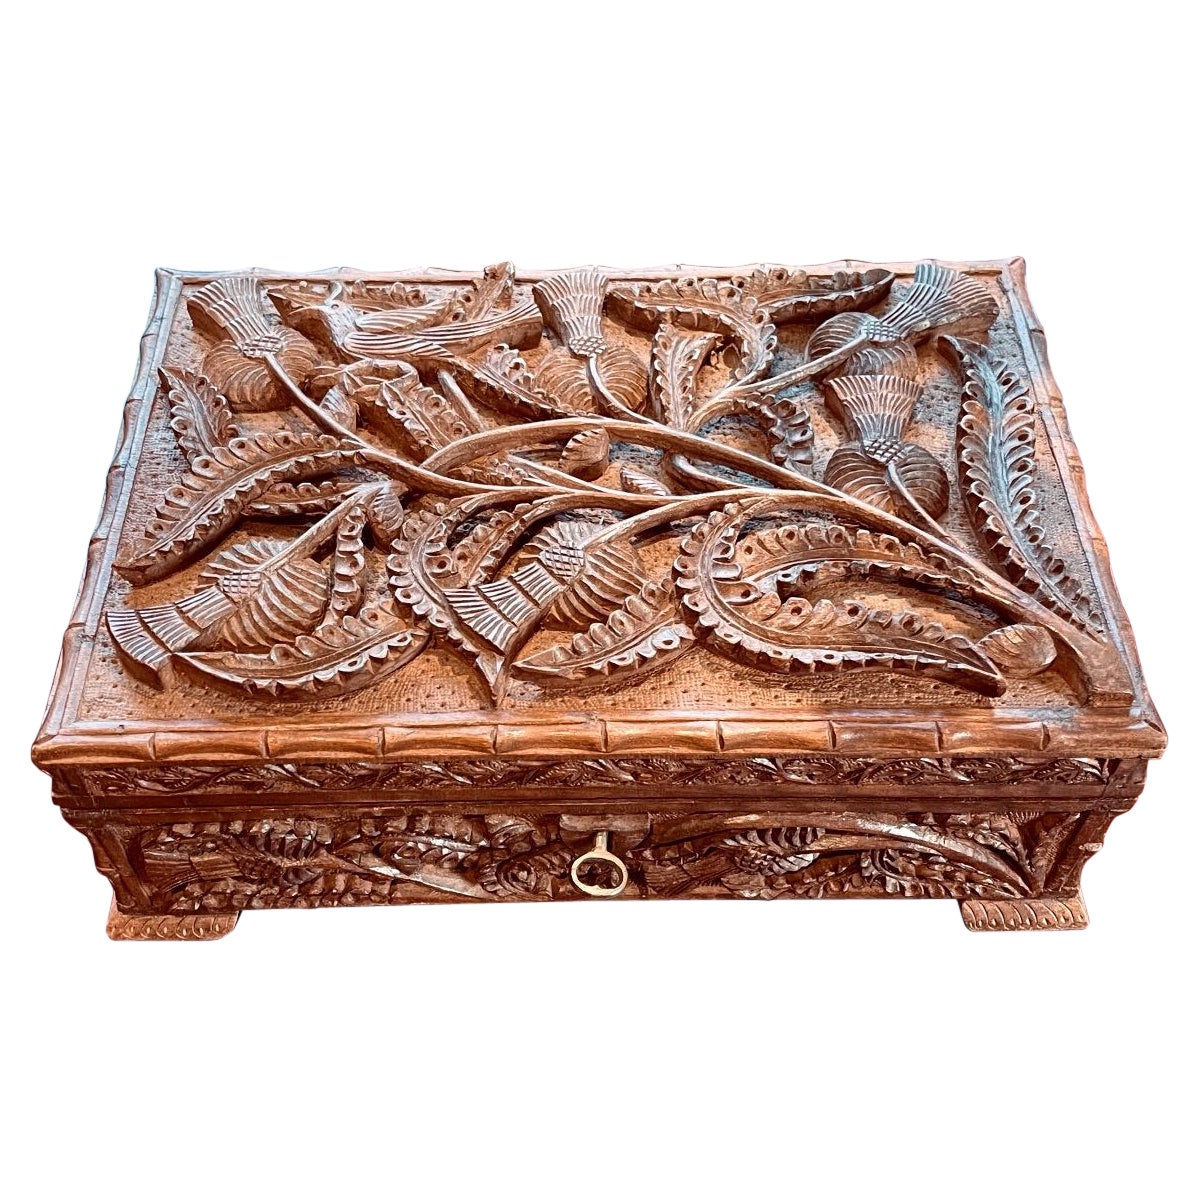 Exceptional Old Huanghuali Wood Box From North Vietnam, Art Deco